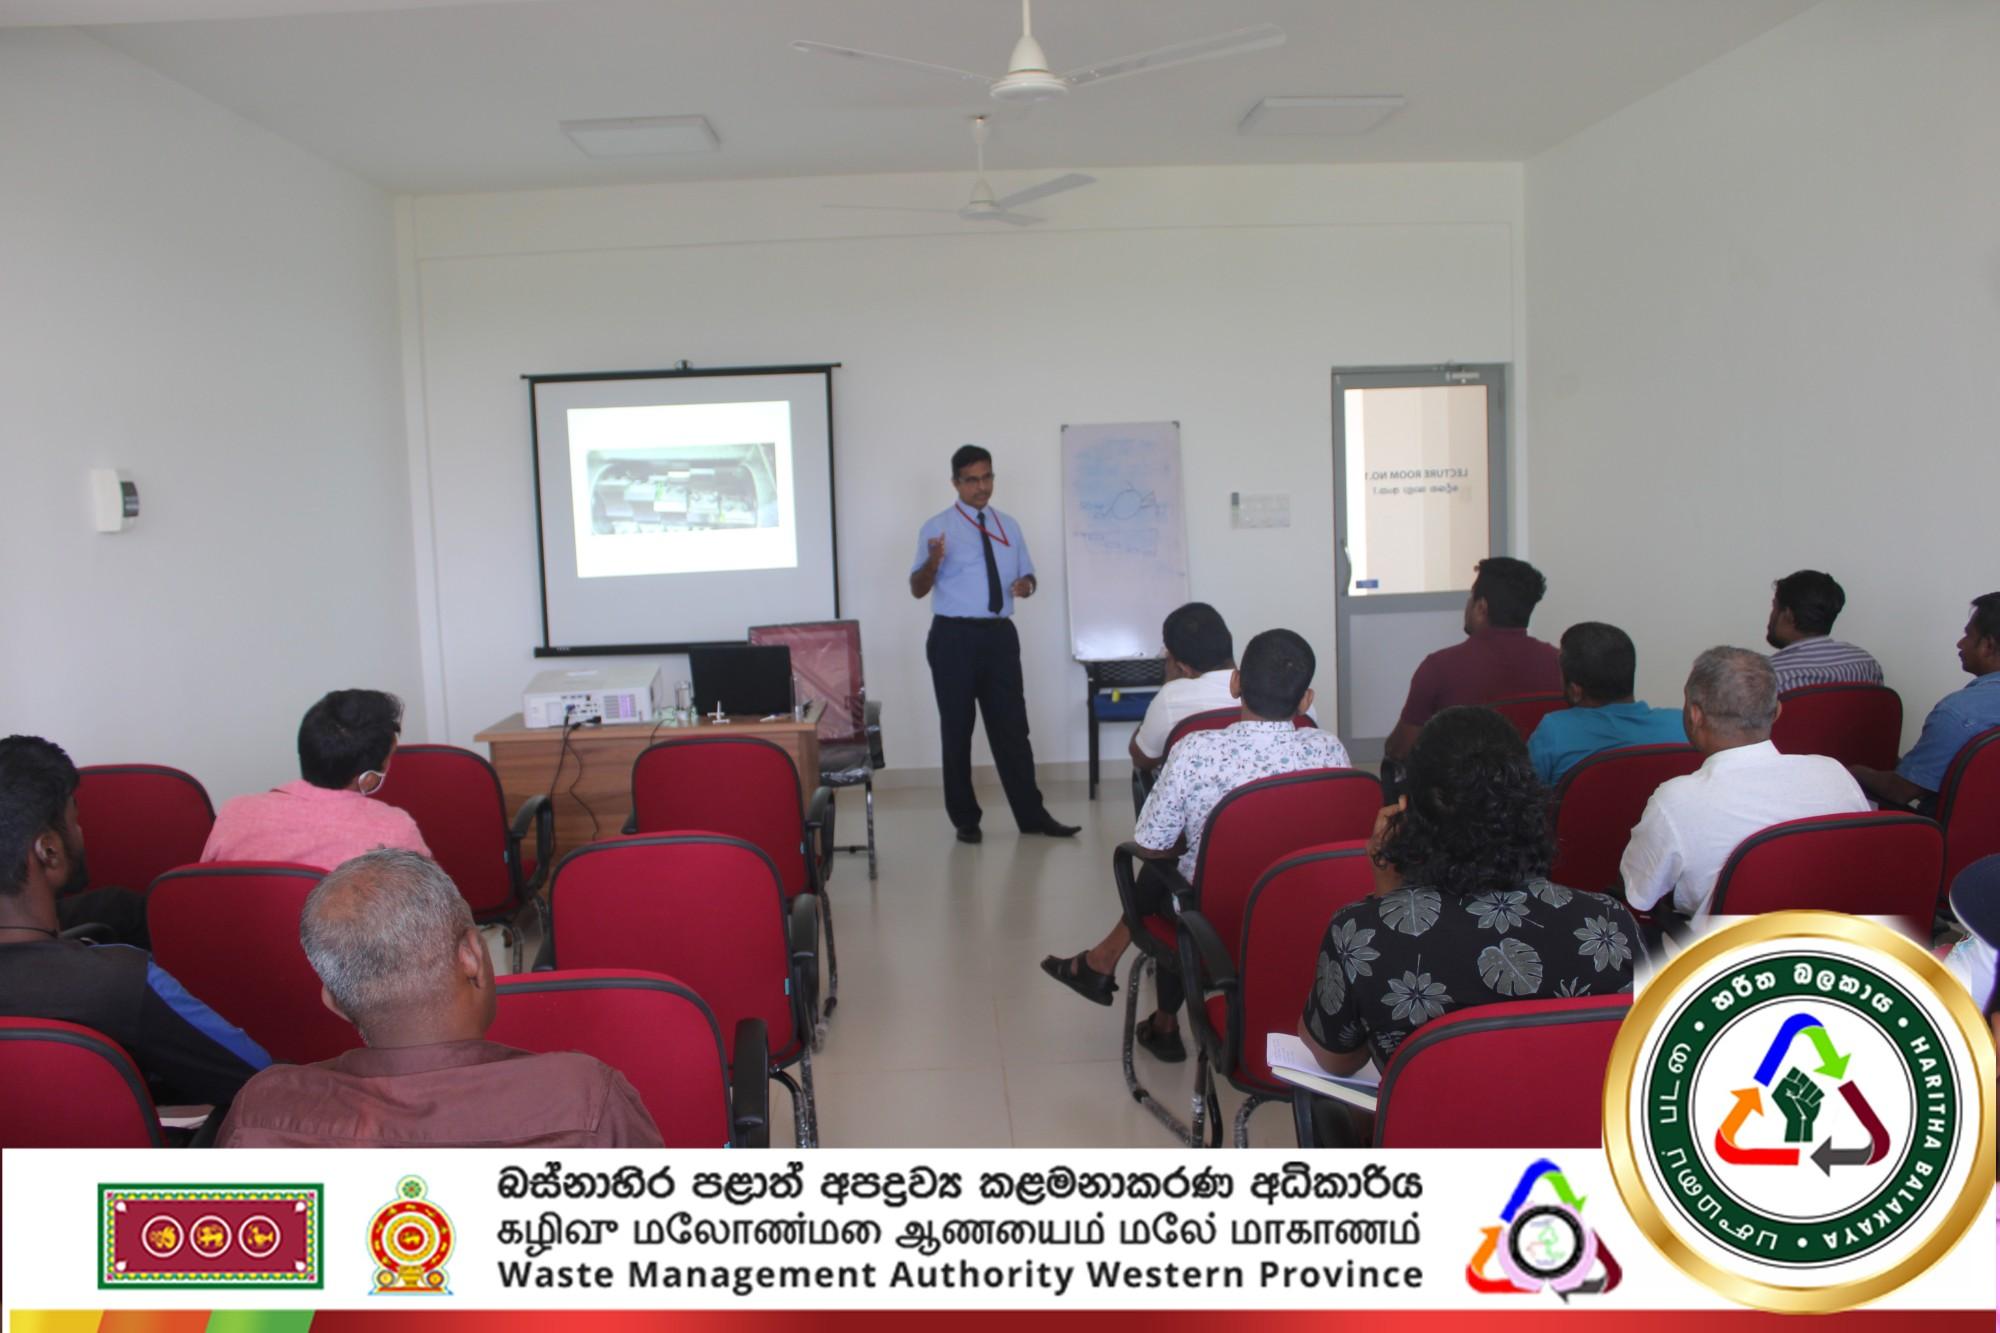 “MIHISARU” FIELD RESEARCH & TRAINING CENTER - Waste Management Authority - Western Province - 2023.03.03